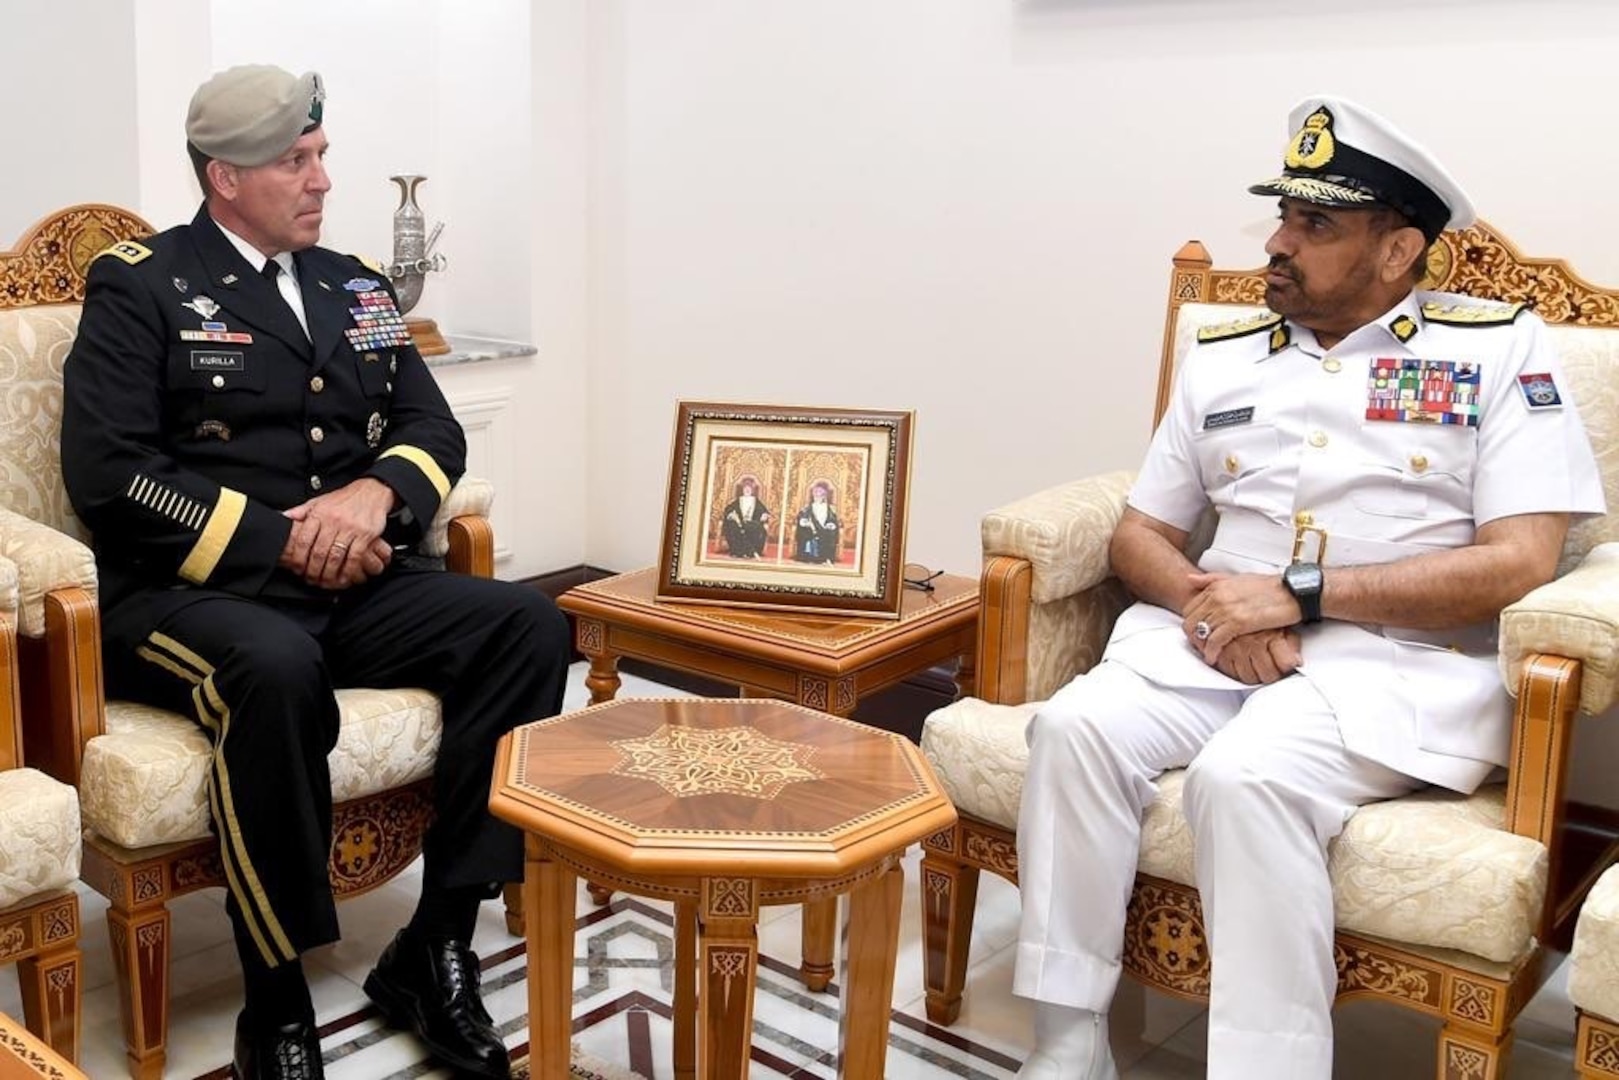 General Kurilla with Vice Admiral Abdullah Khamis Al Ra'eesi, Chief of Staff of the Sultan's Armed Forces, Muscat, Oman, June 19, 2022